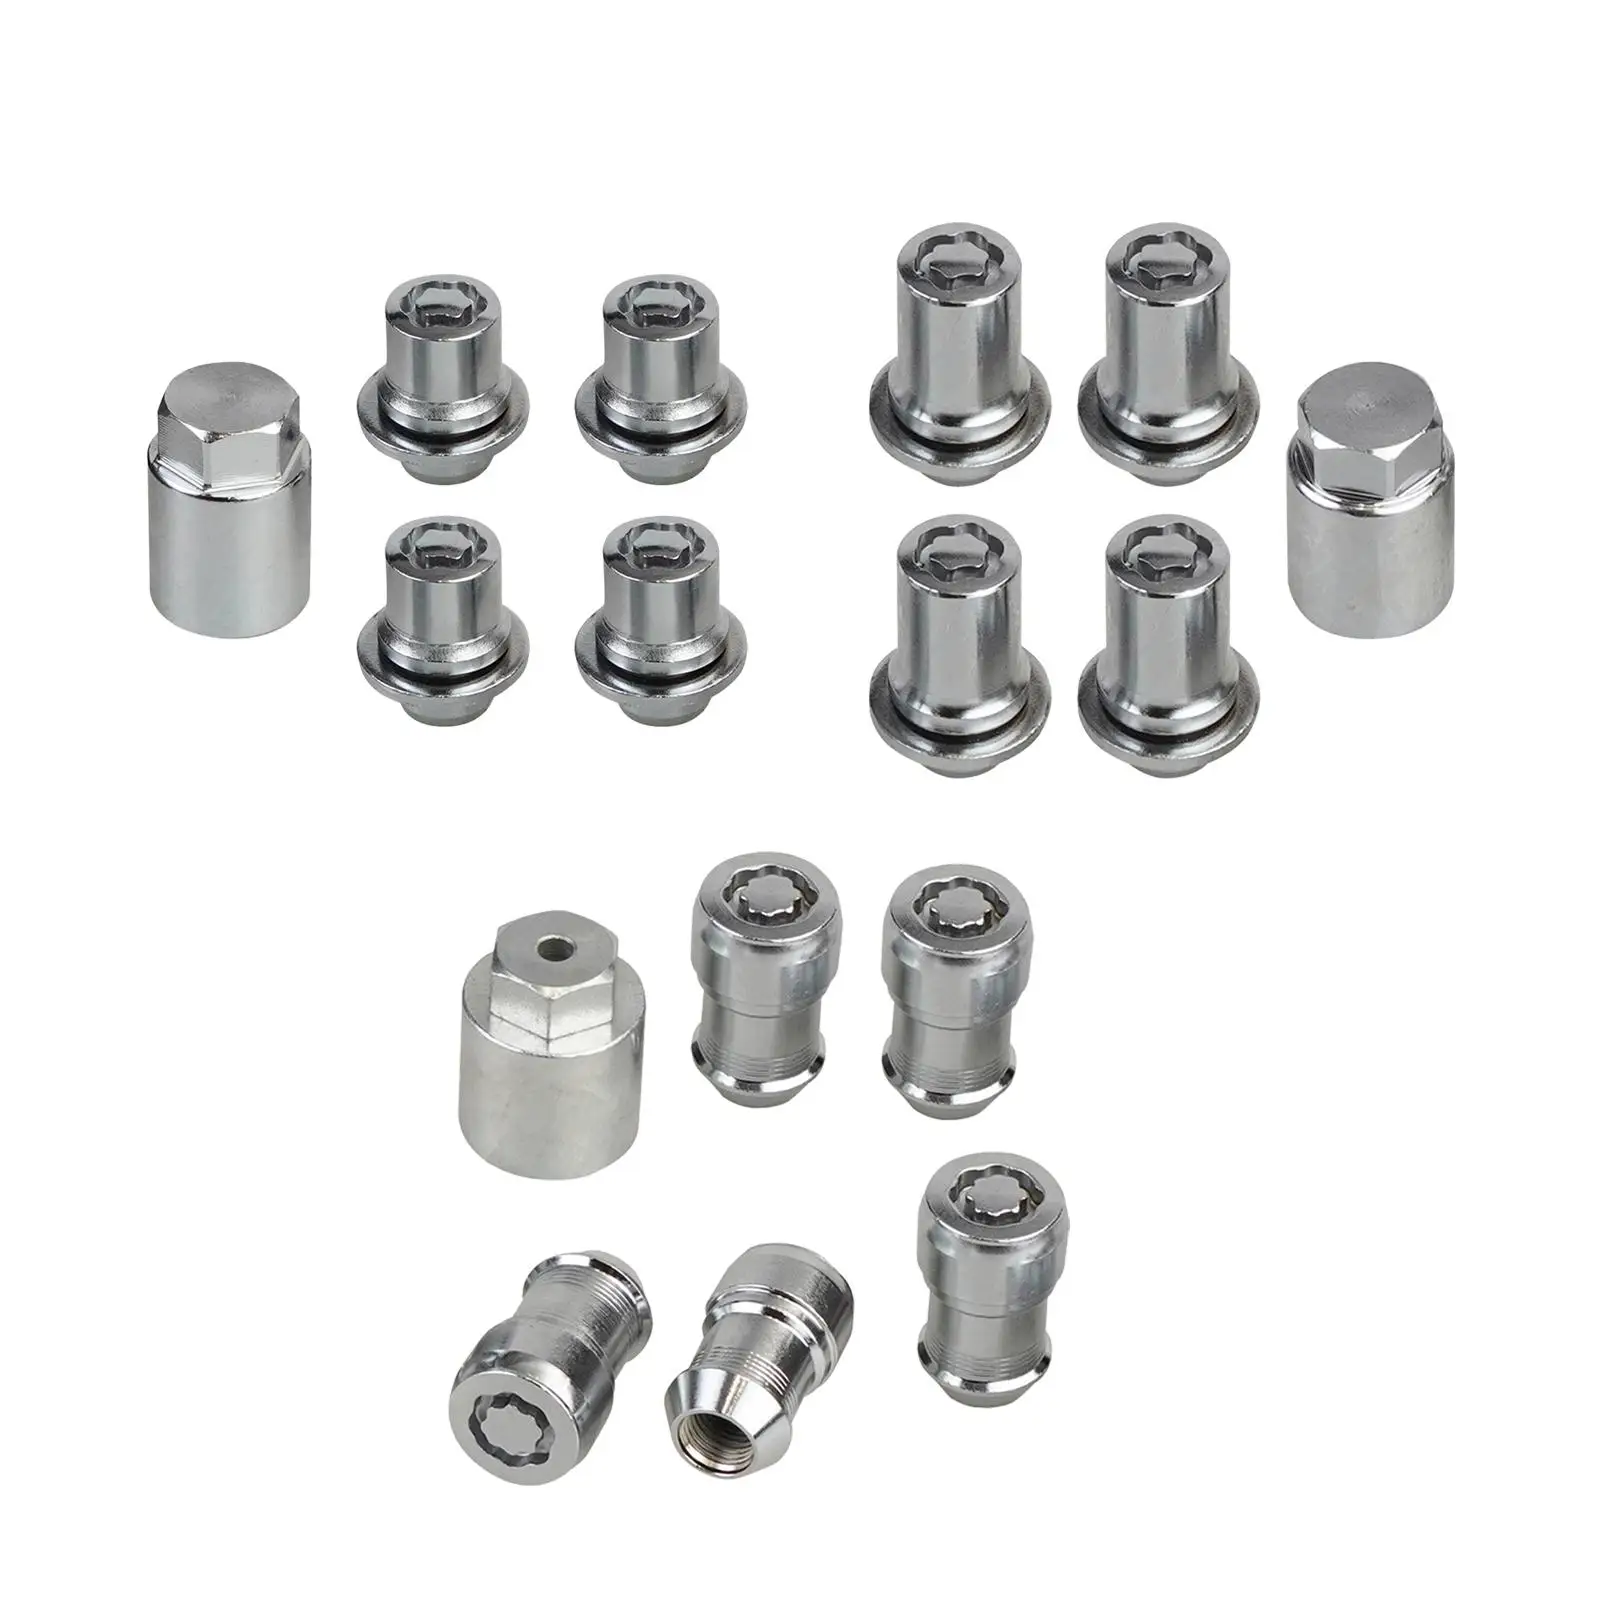 Wheel Lock Lug Nuts Set Heavy Duty High Performance Practical Premium Durable Spare Parts Devices Car Accessories Replacement